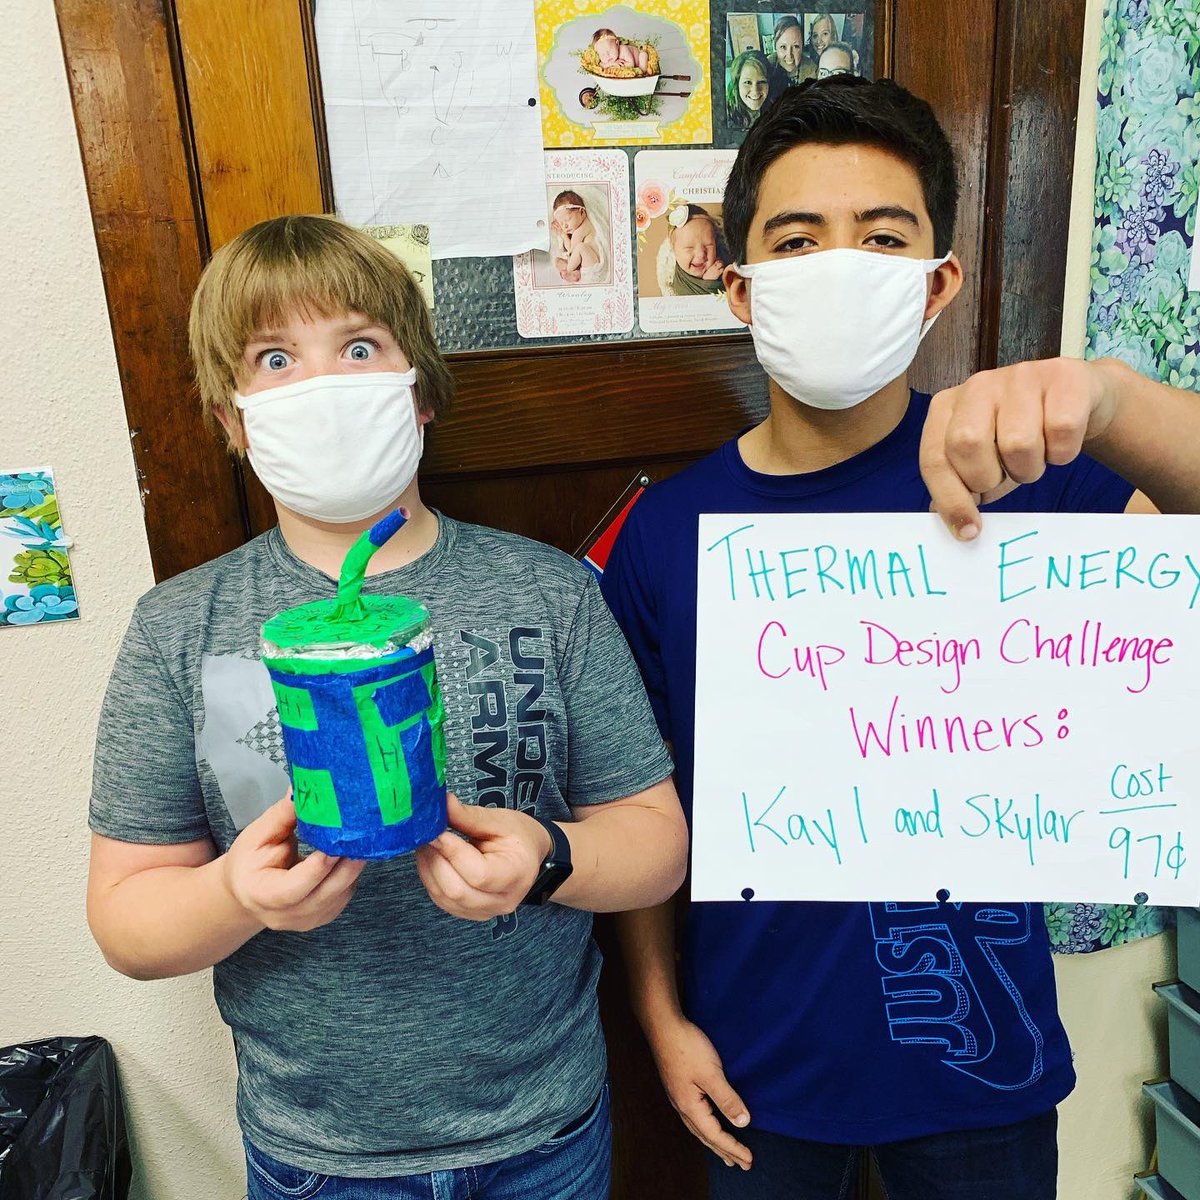 My classroom has been transformed with inquiry based learning that hits so many cross-cutting concepts. My students enjoy investigating with OpenSci Ed! #MyOpenSciEdStory #NIBison #linkingstudentswithsucess #thermalenergy #cupchallenge